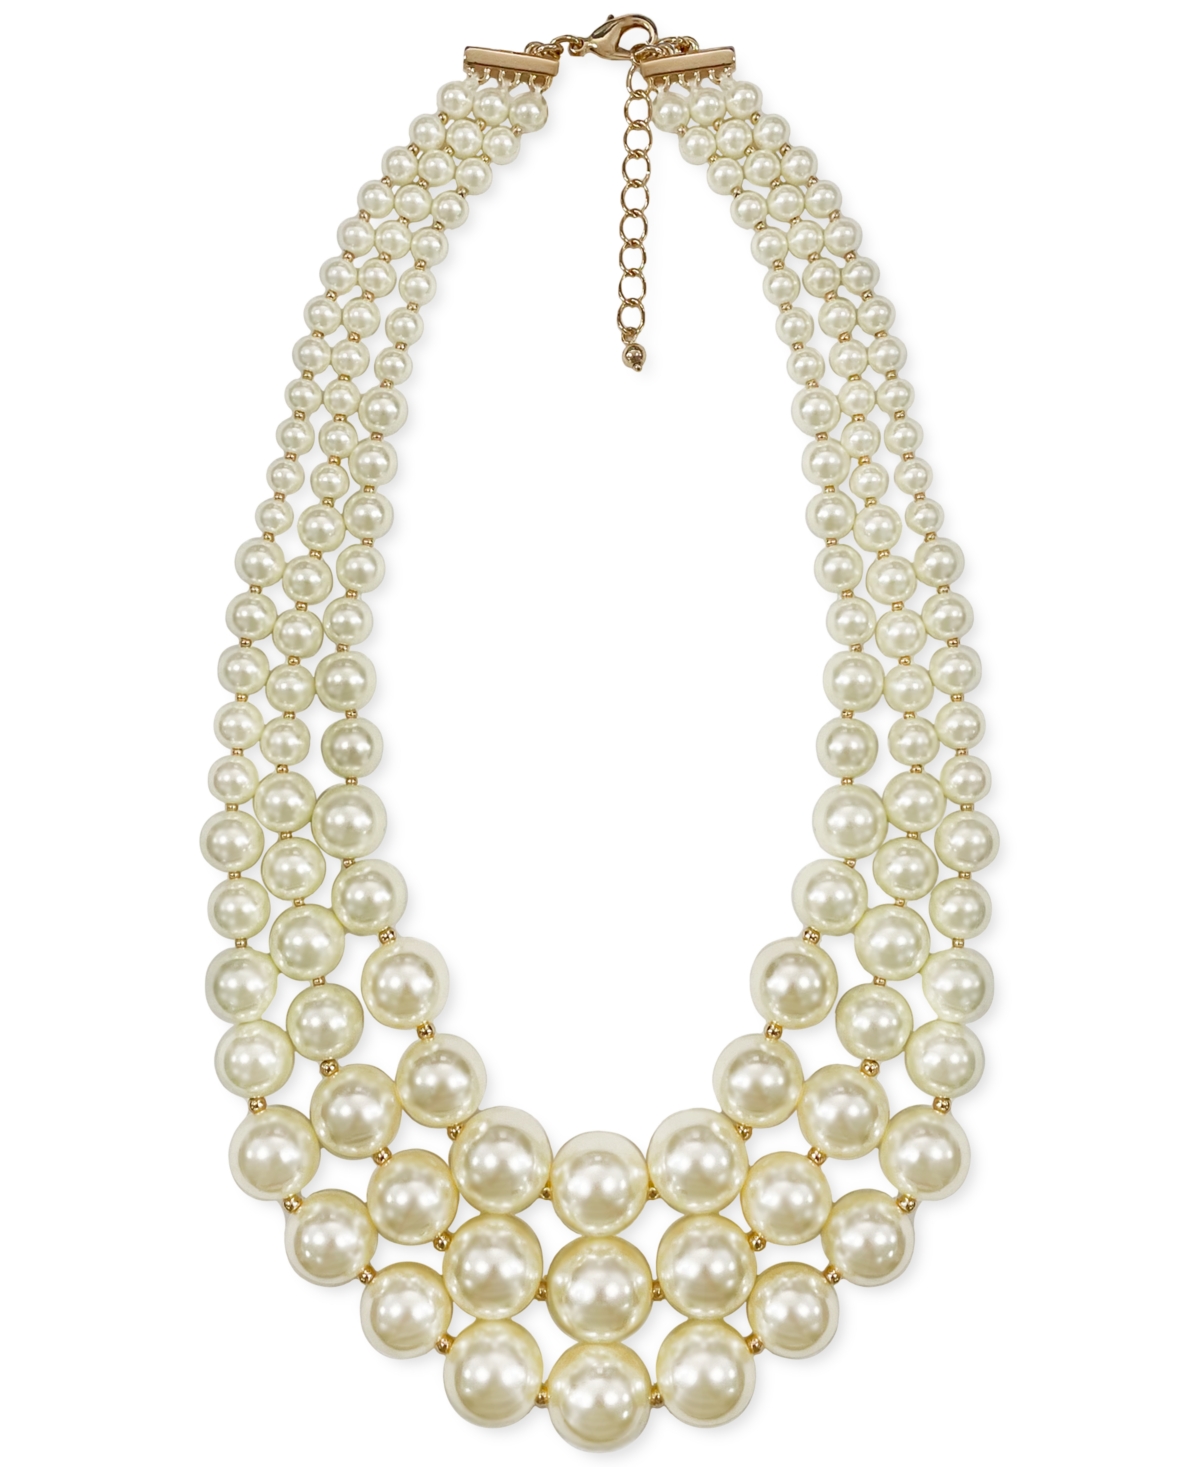 Imitation Pearl Three-Row Collar Necklace, Created for Macy's - Pink